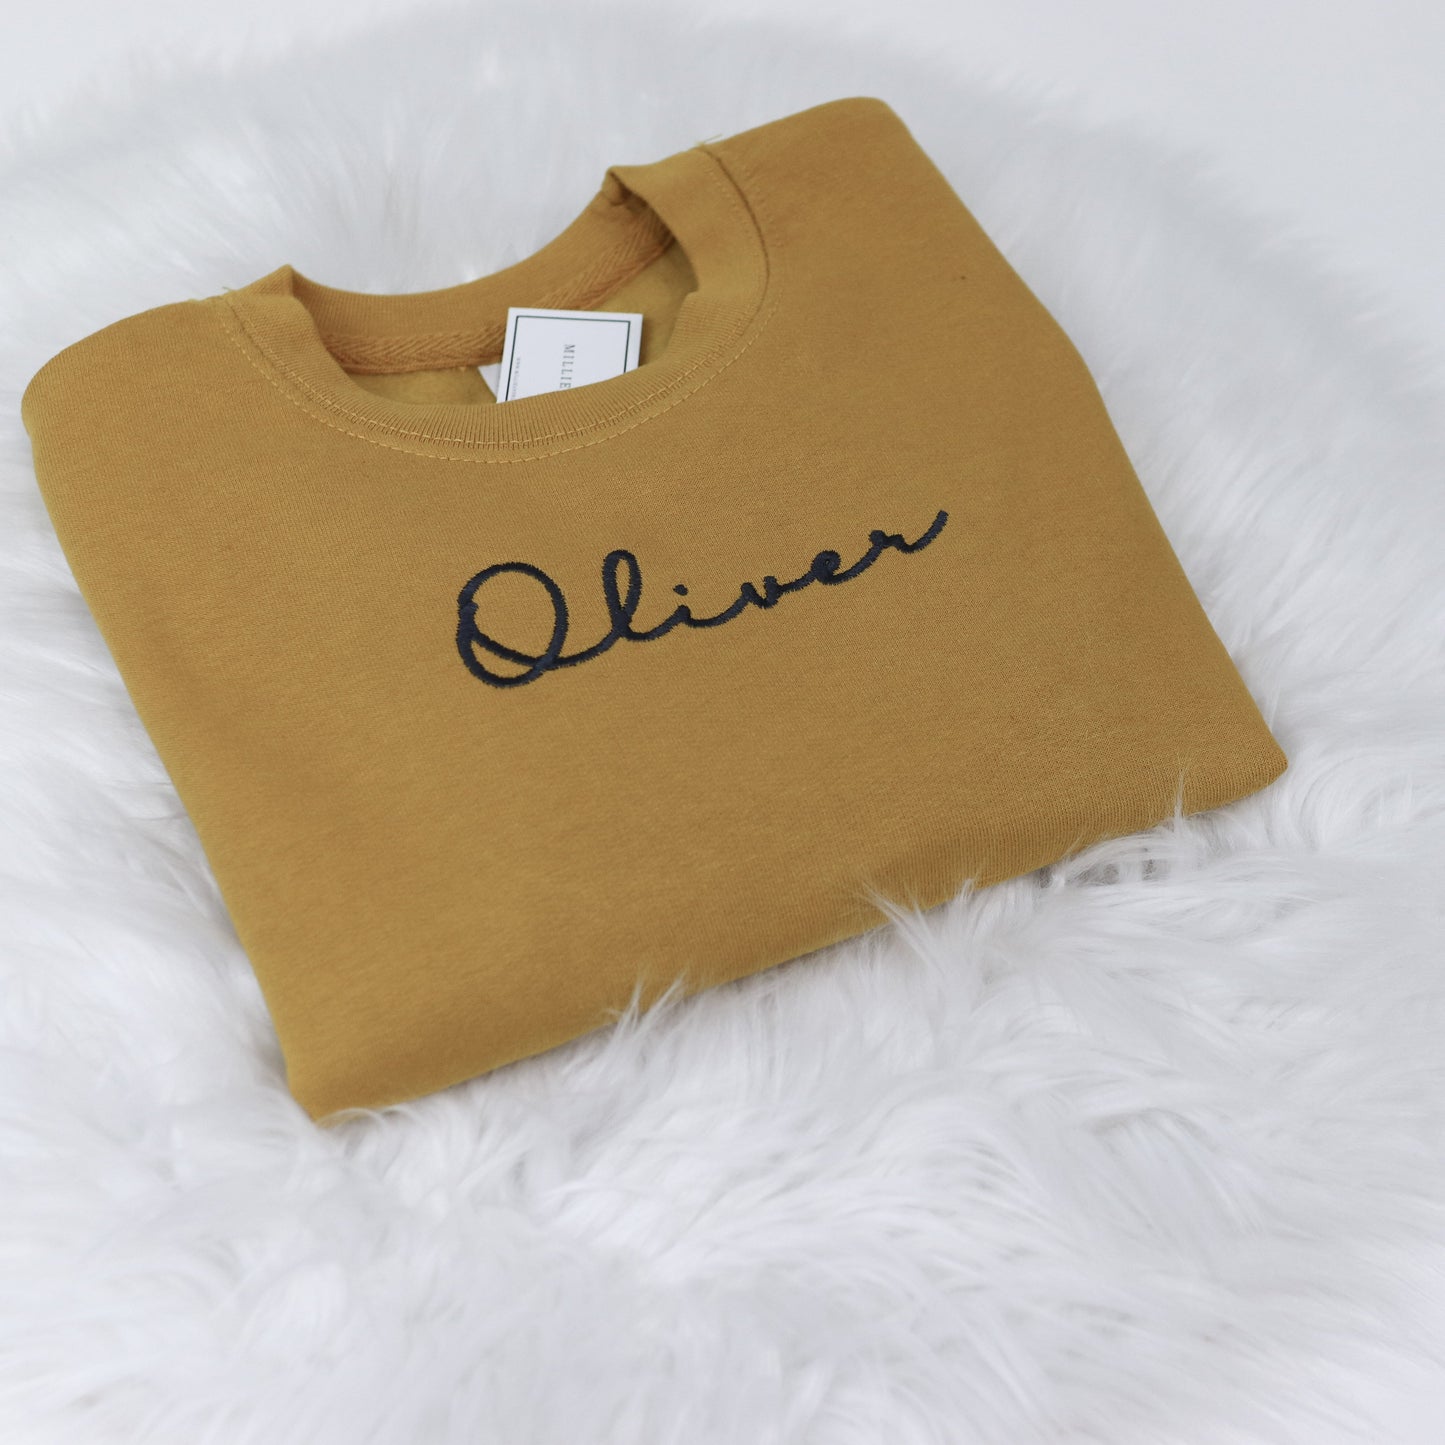 Embroidered Blesson Sweatshirt